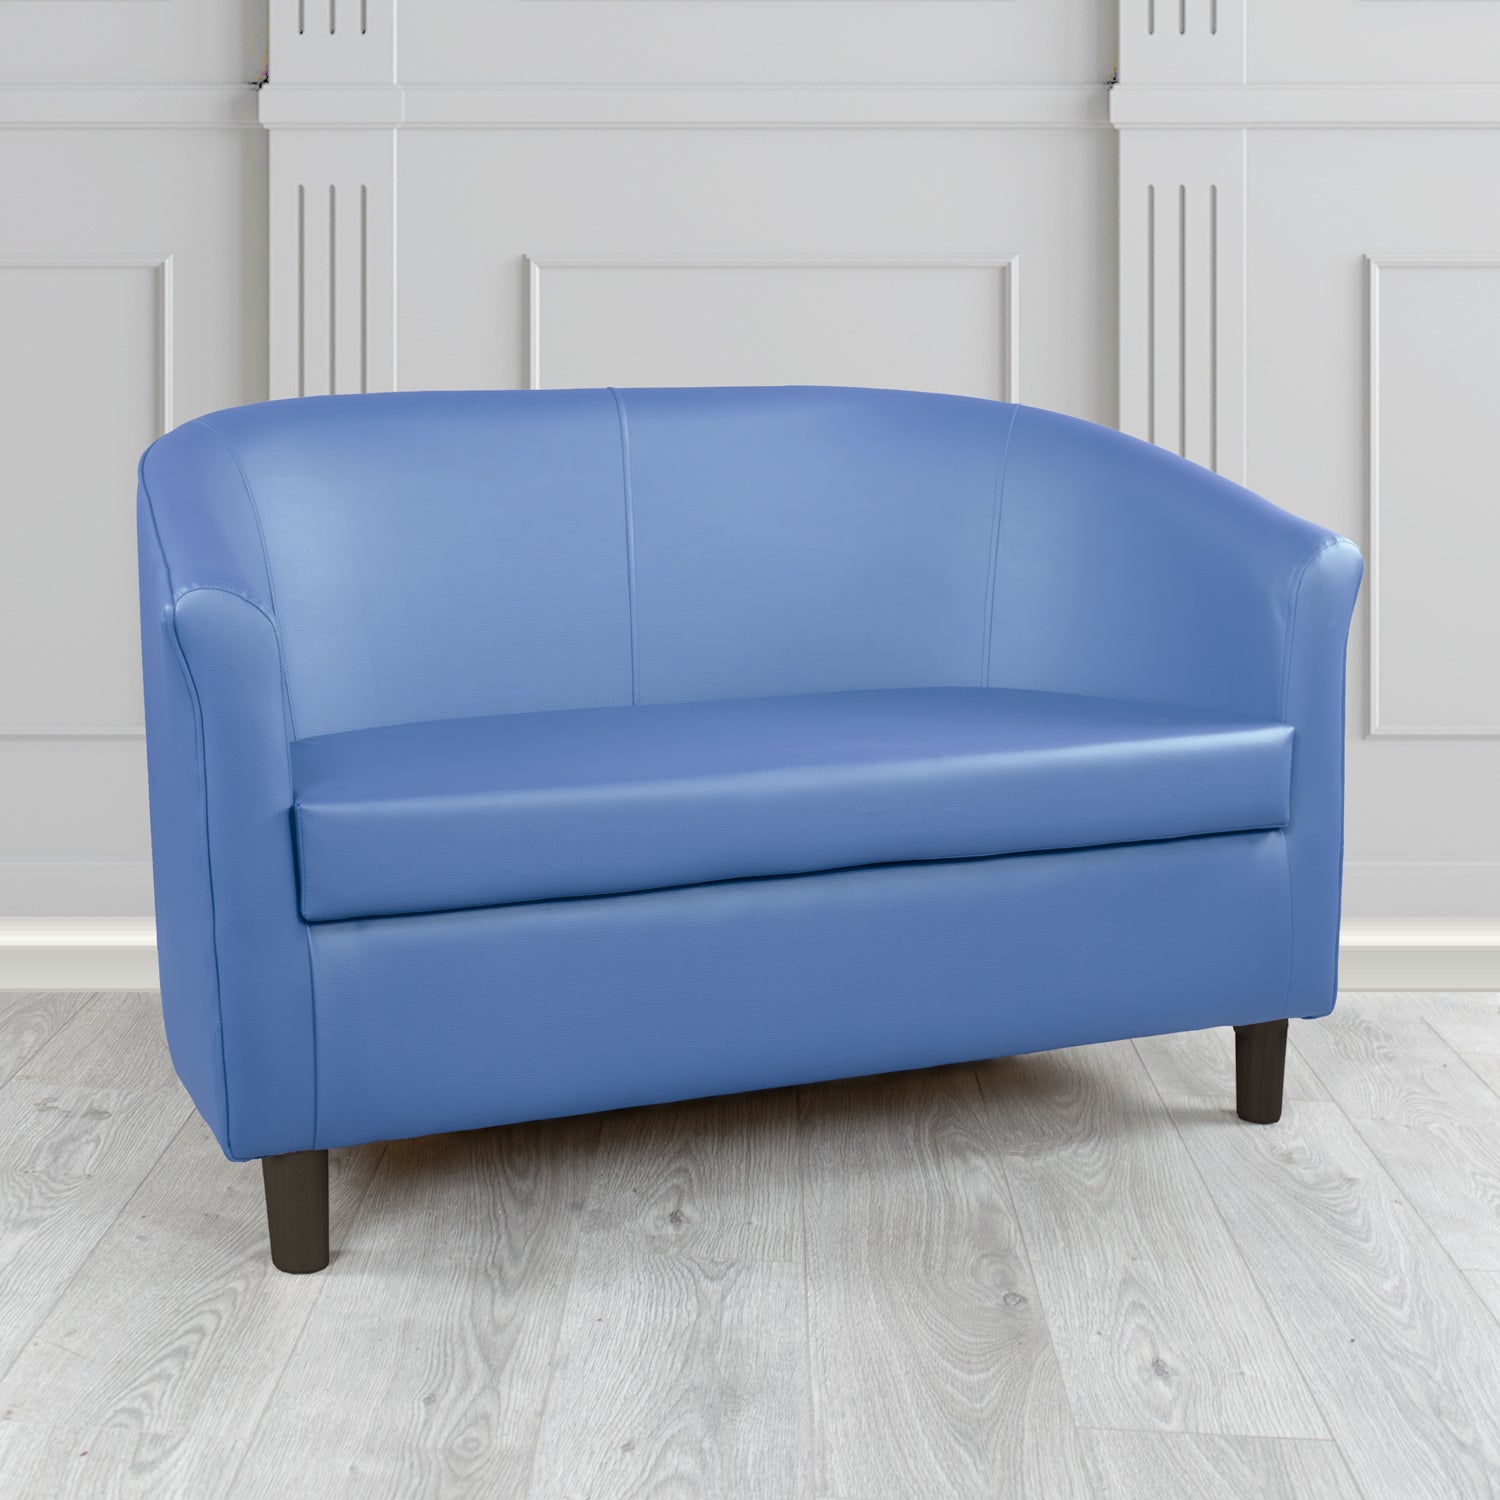 Tuscany Just Colour Blue Steel Crib 5 Faux Leather 2 Seater Tub Sofa - The Tub Chair Shop